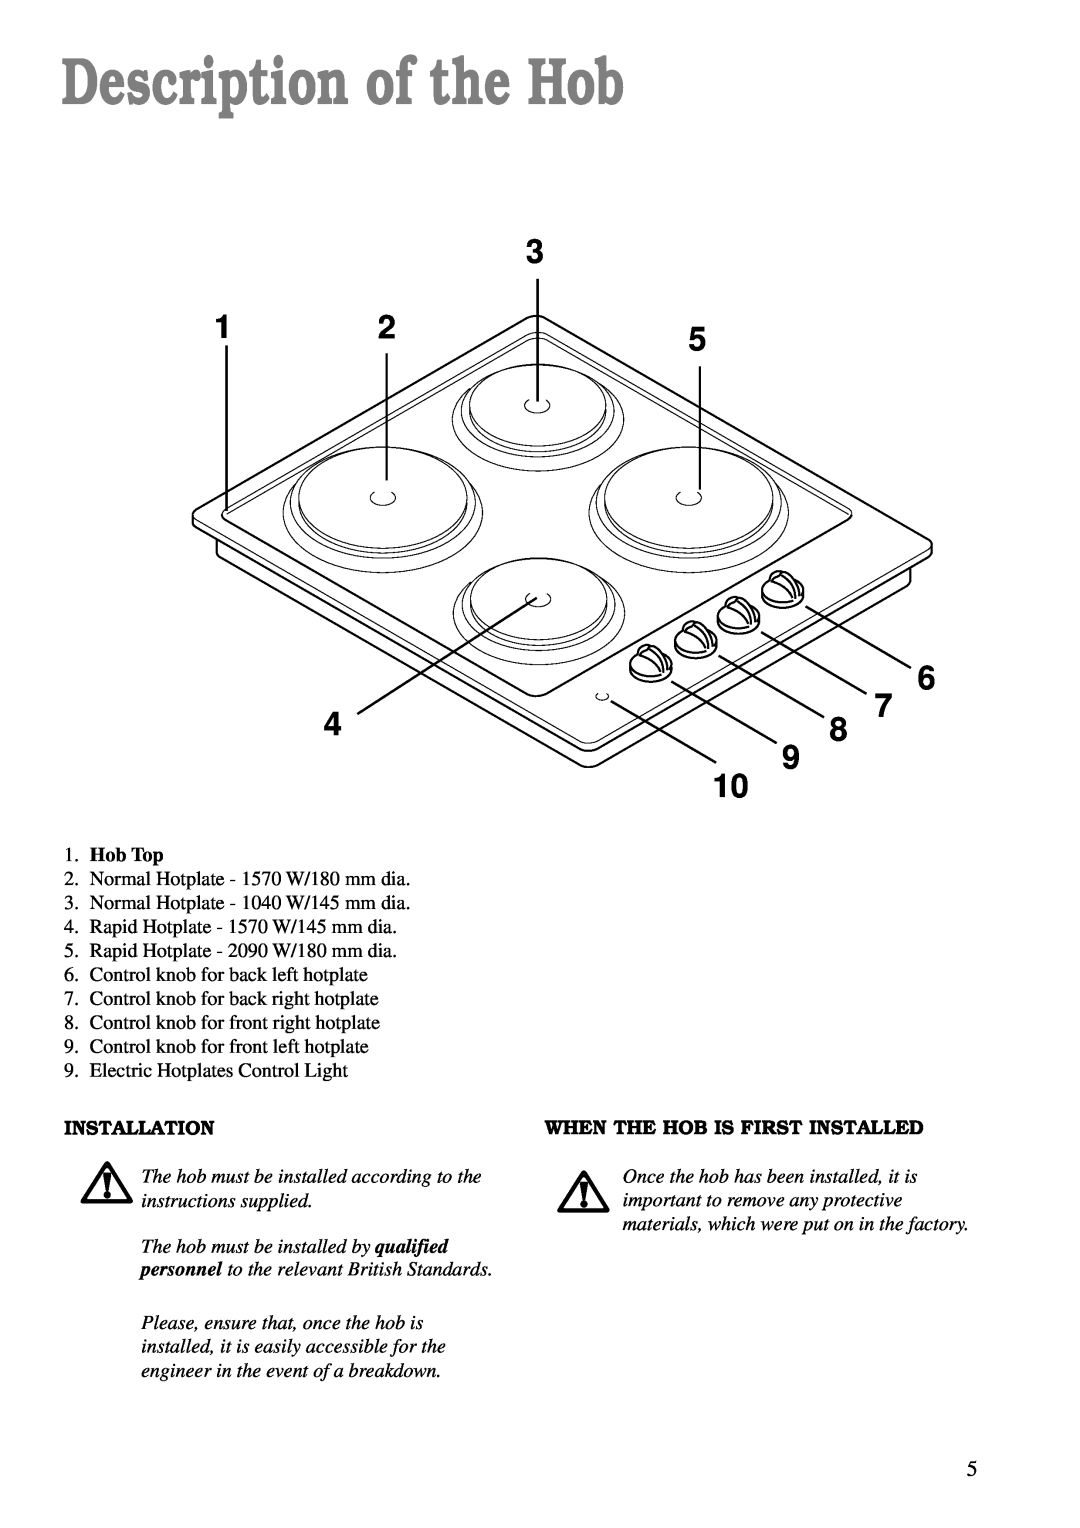 Zanussi ZEA 85 manual Description of the Hob, Hob Top, Installation, When The Hob Is First Installed 